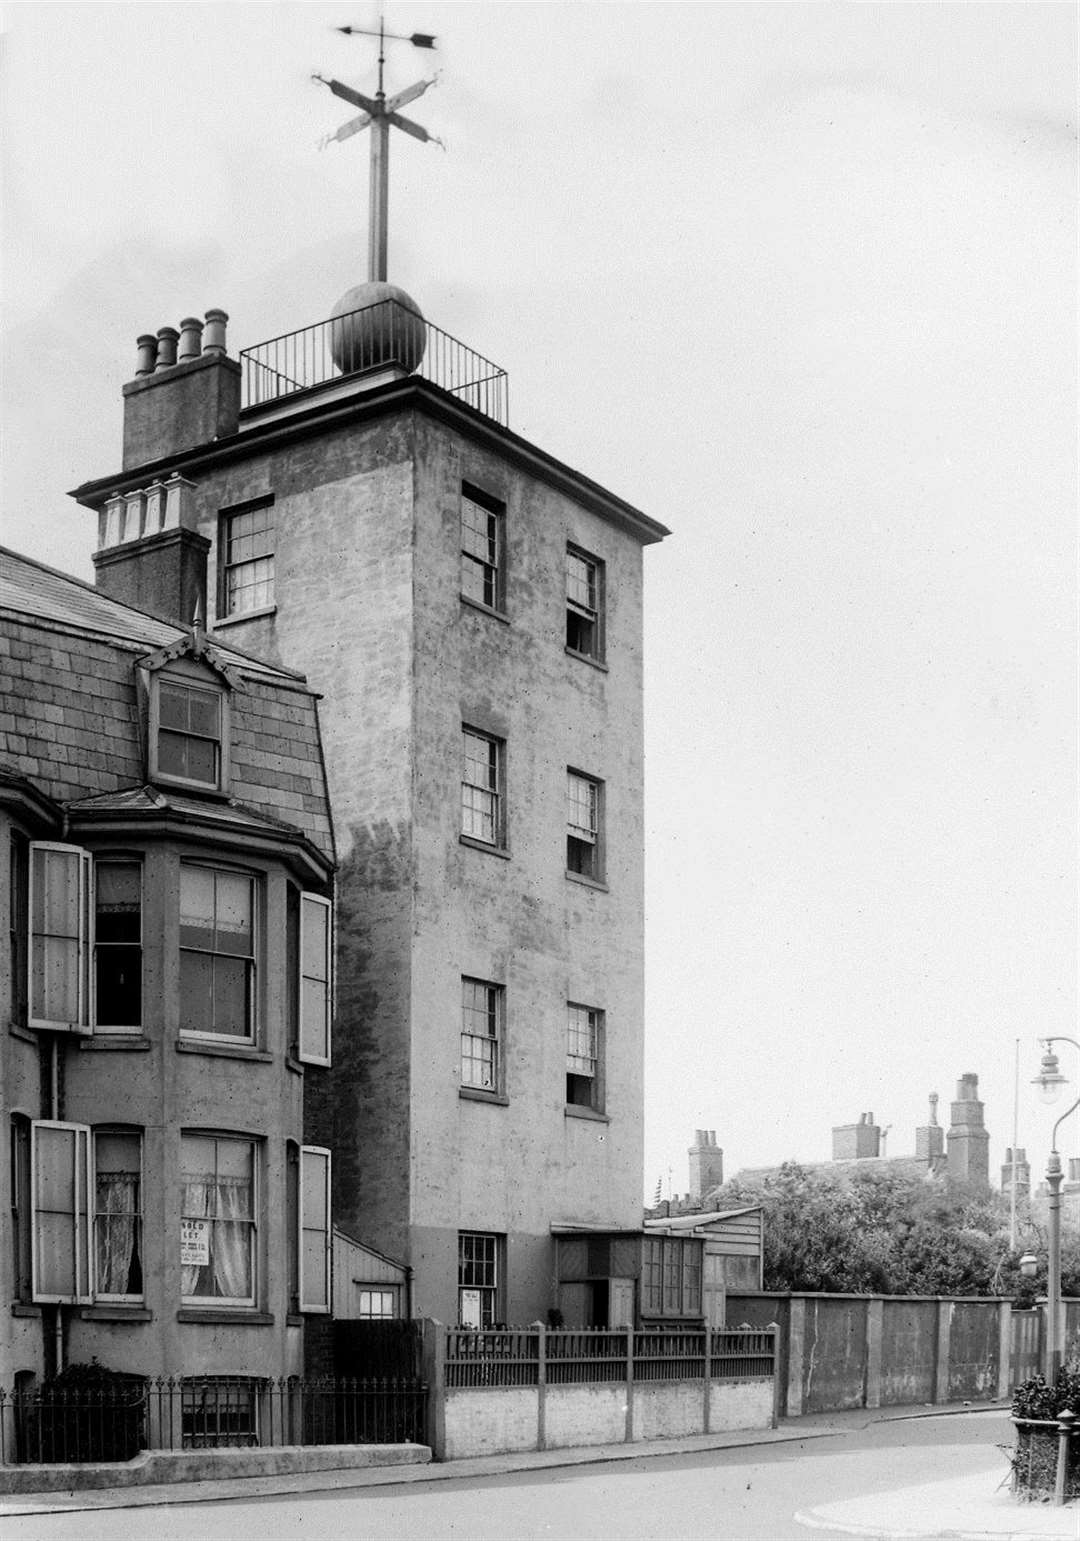 The Timeball Tower structure in 1913